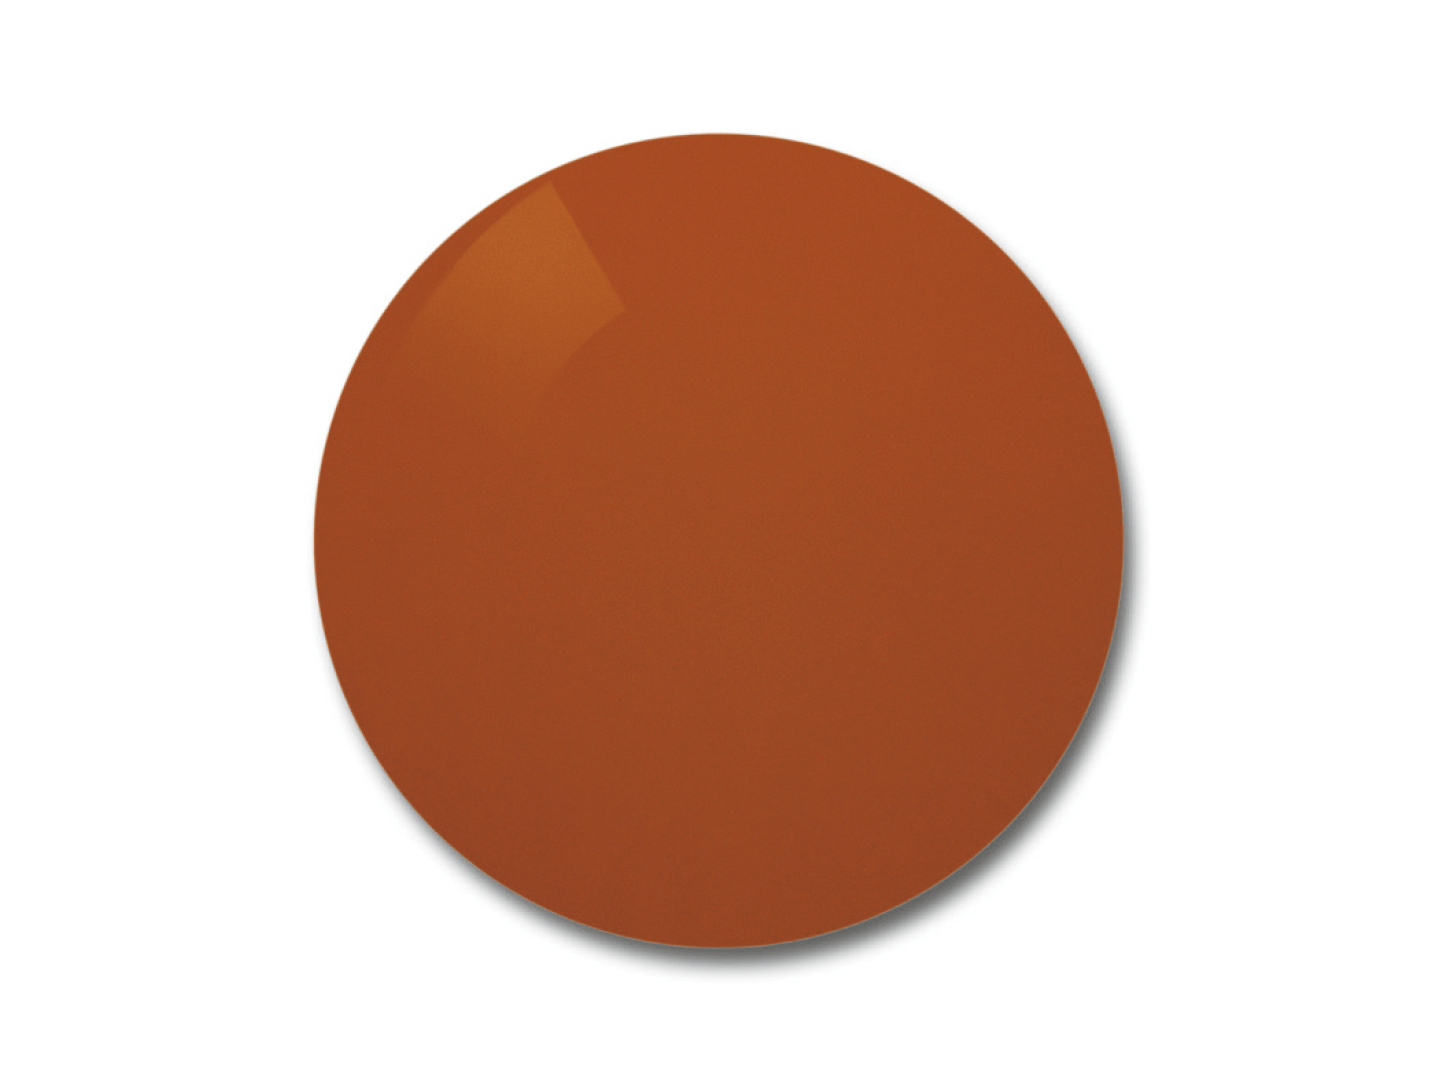 Color example of the Skylet® Fun lens tint. 